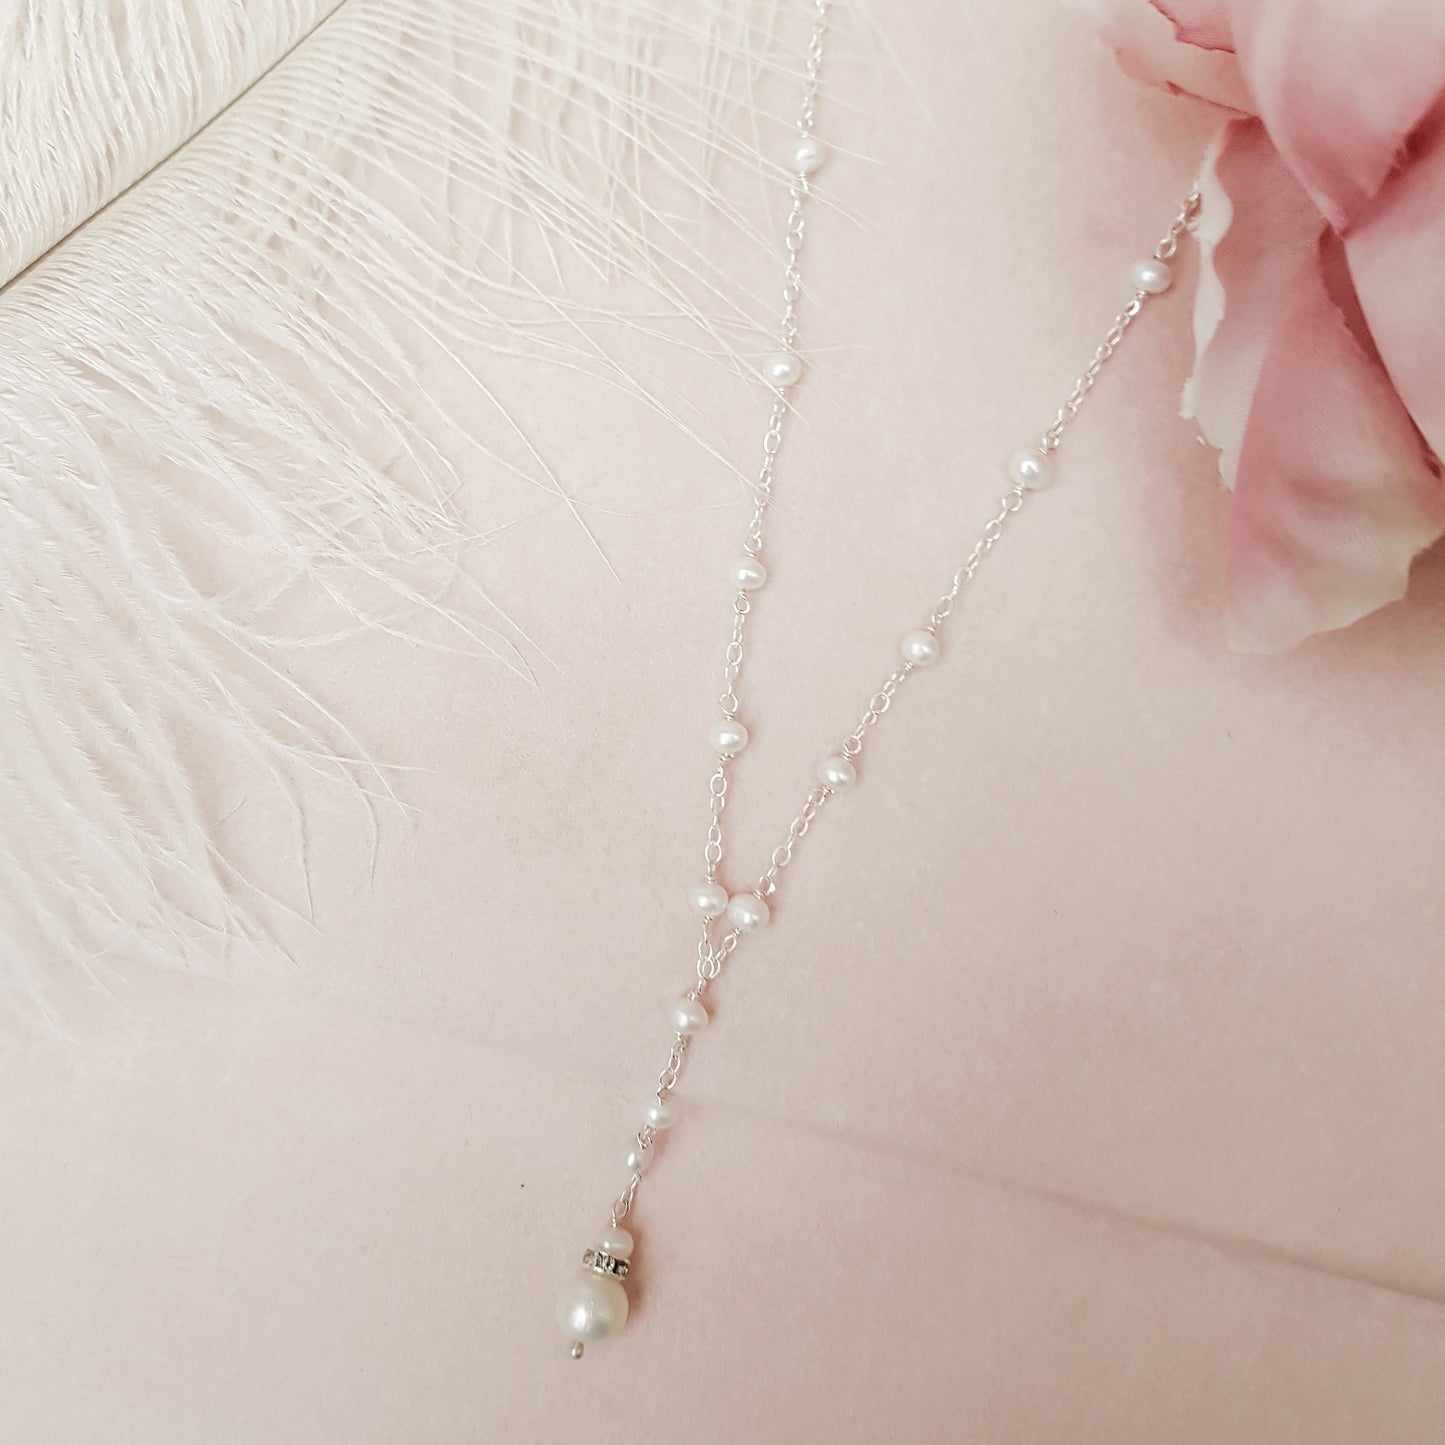 Sonnet Freshwater Pearl Drop Bridal Necklace